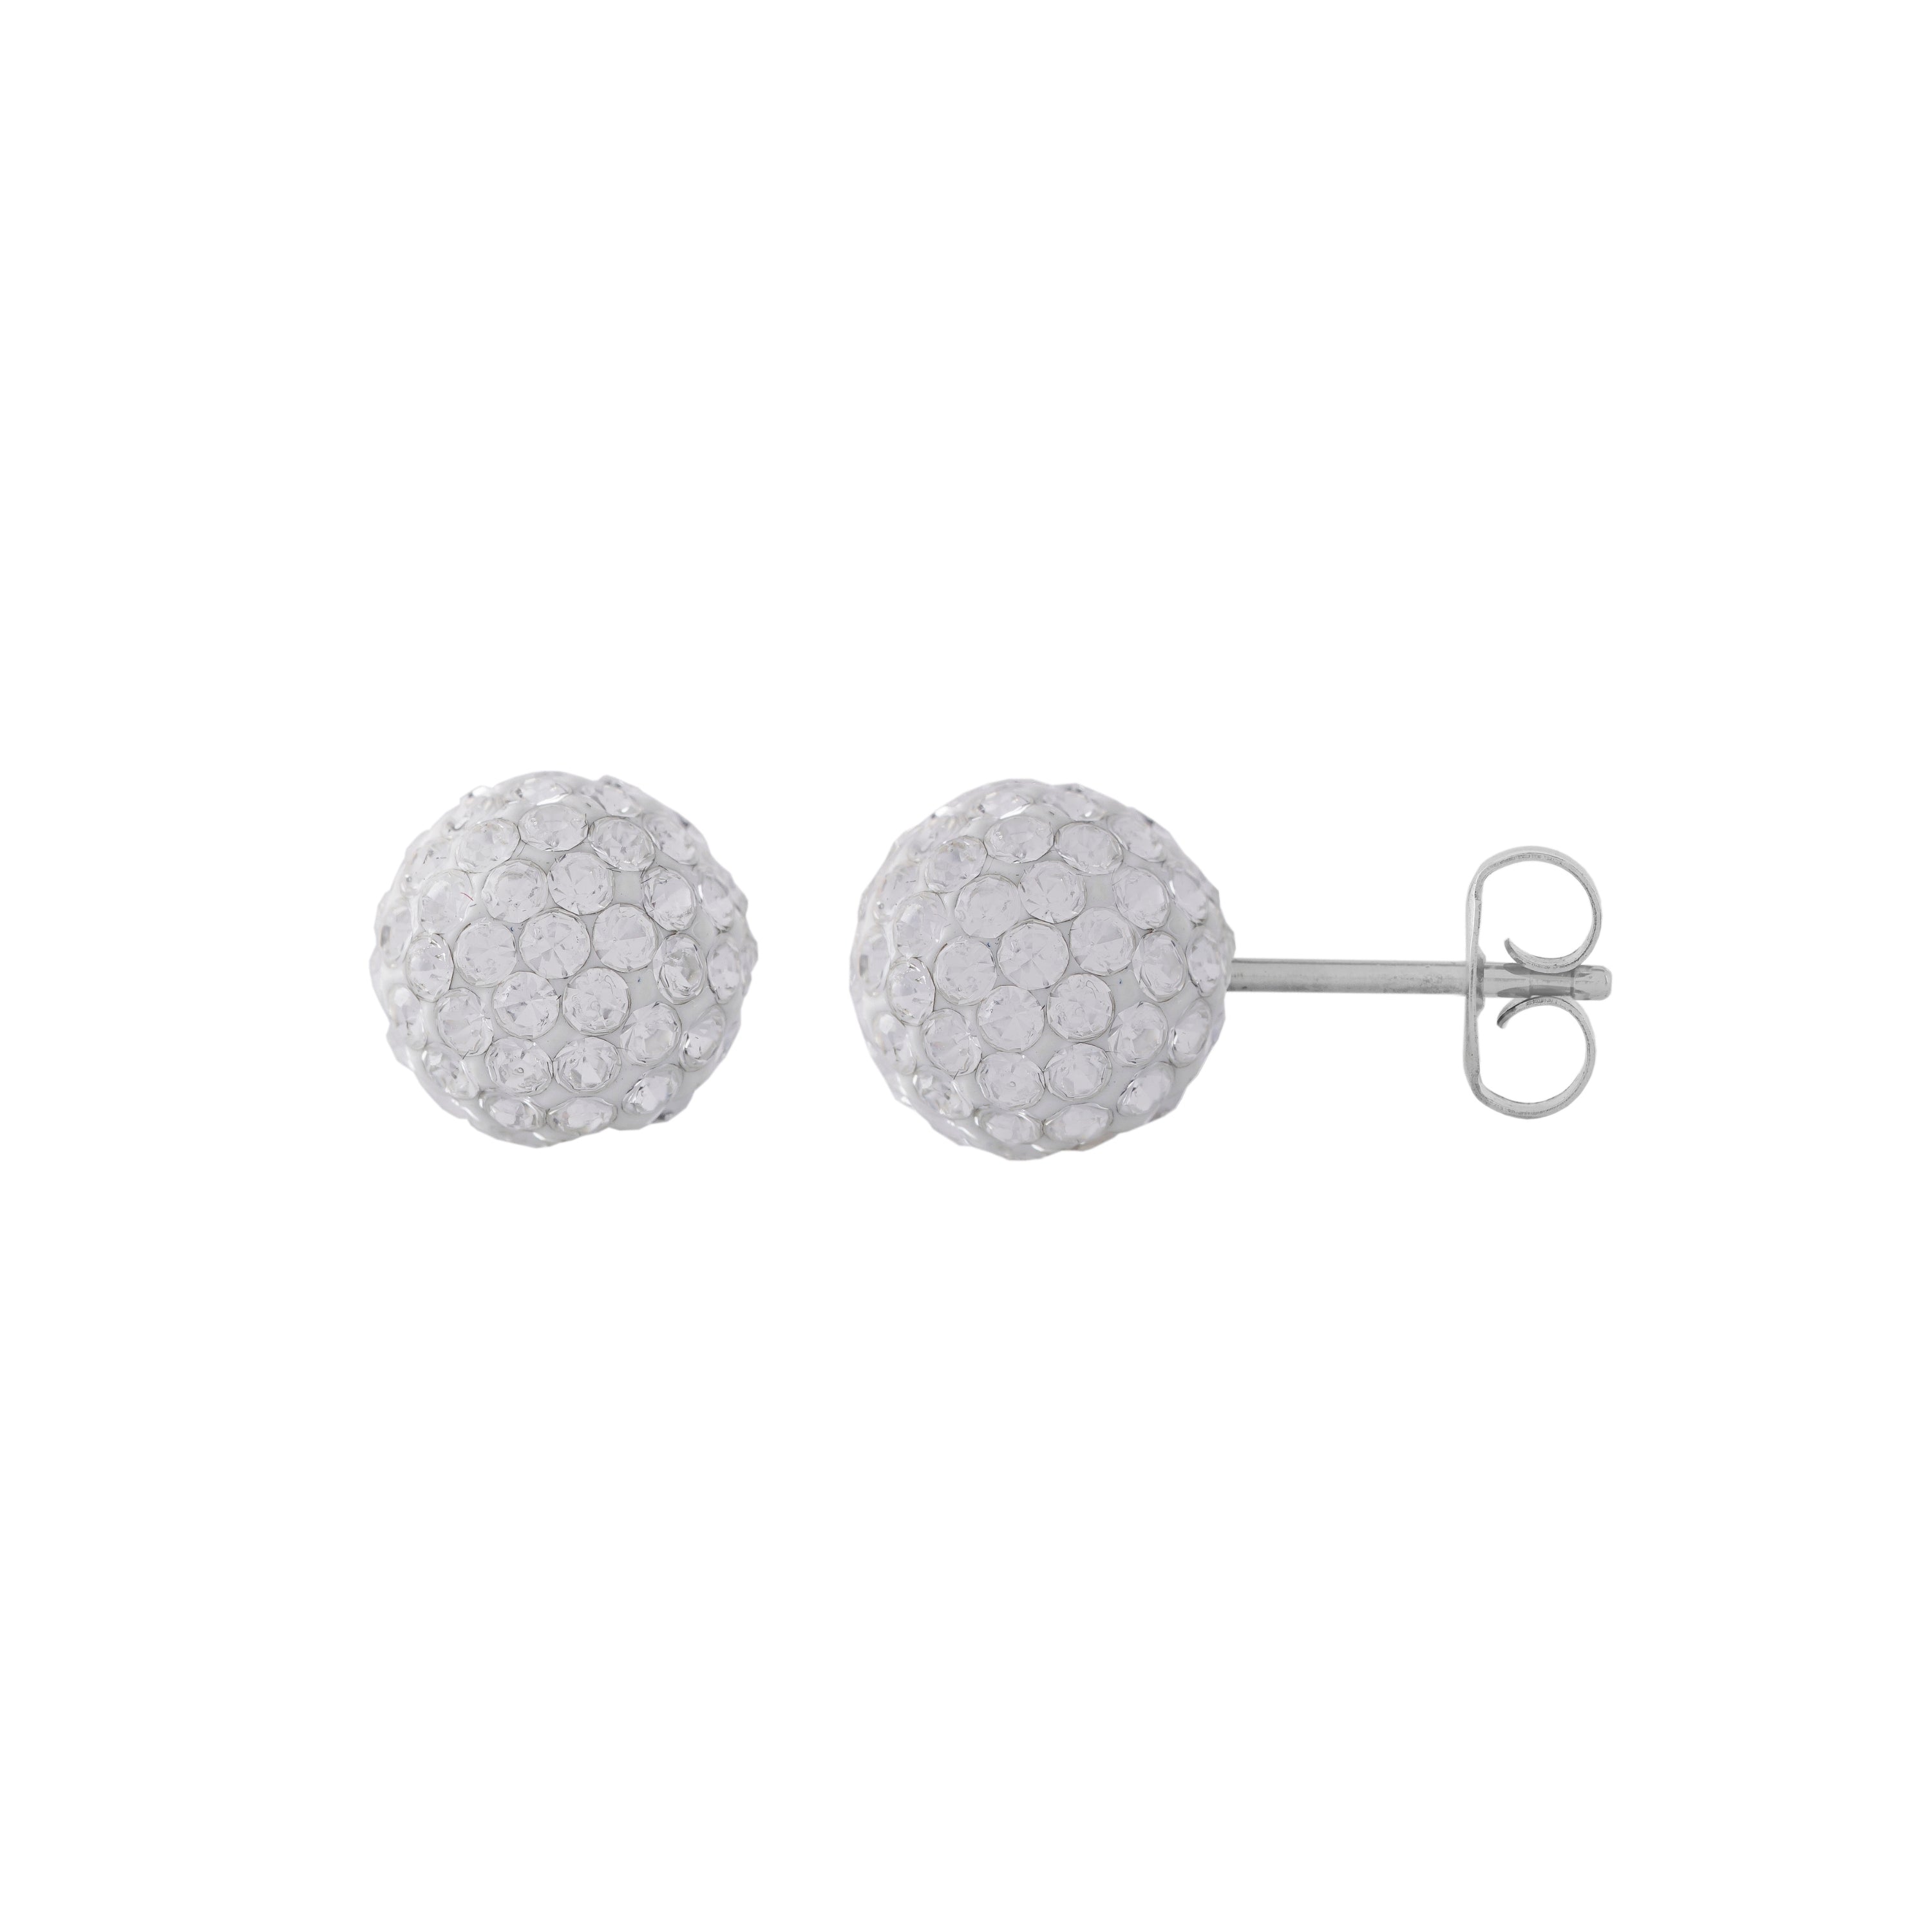 8MM Fireball Ð Crystal Allergy free Stainless Steel Ear Studs | MADE IN USA | Ideal for everyday wear